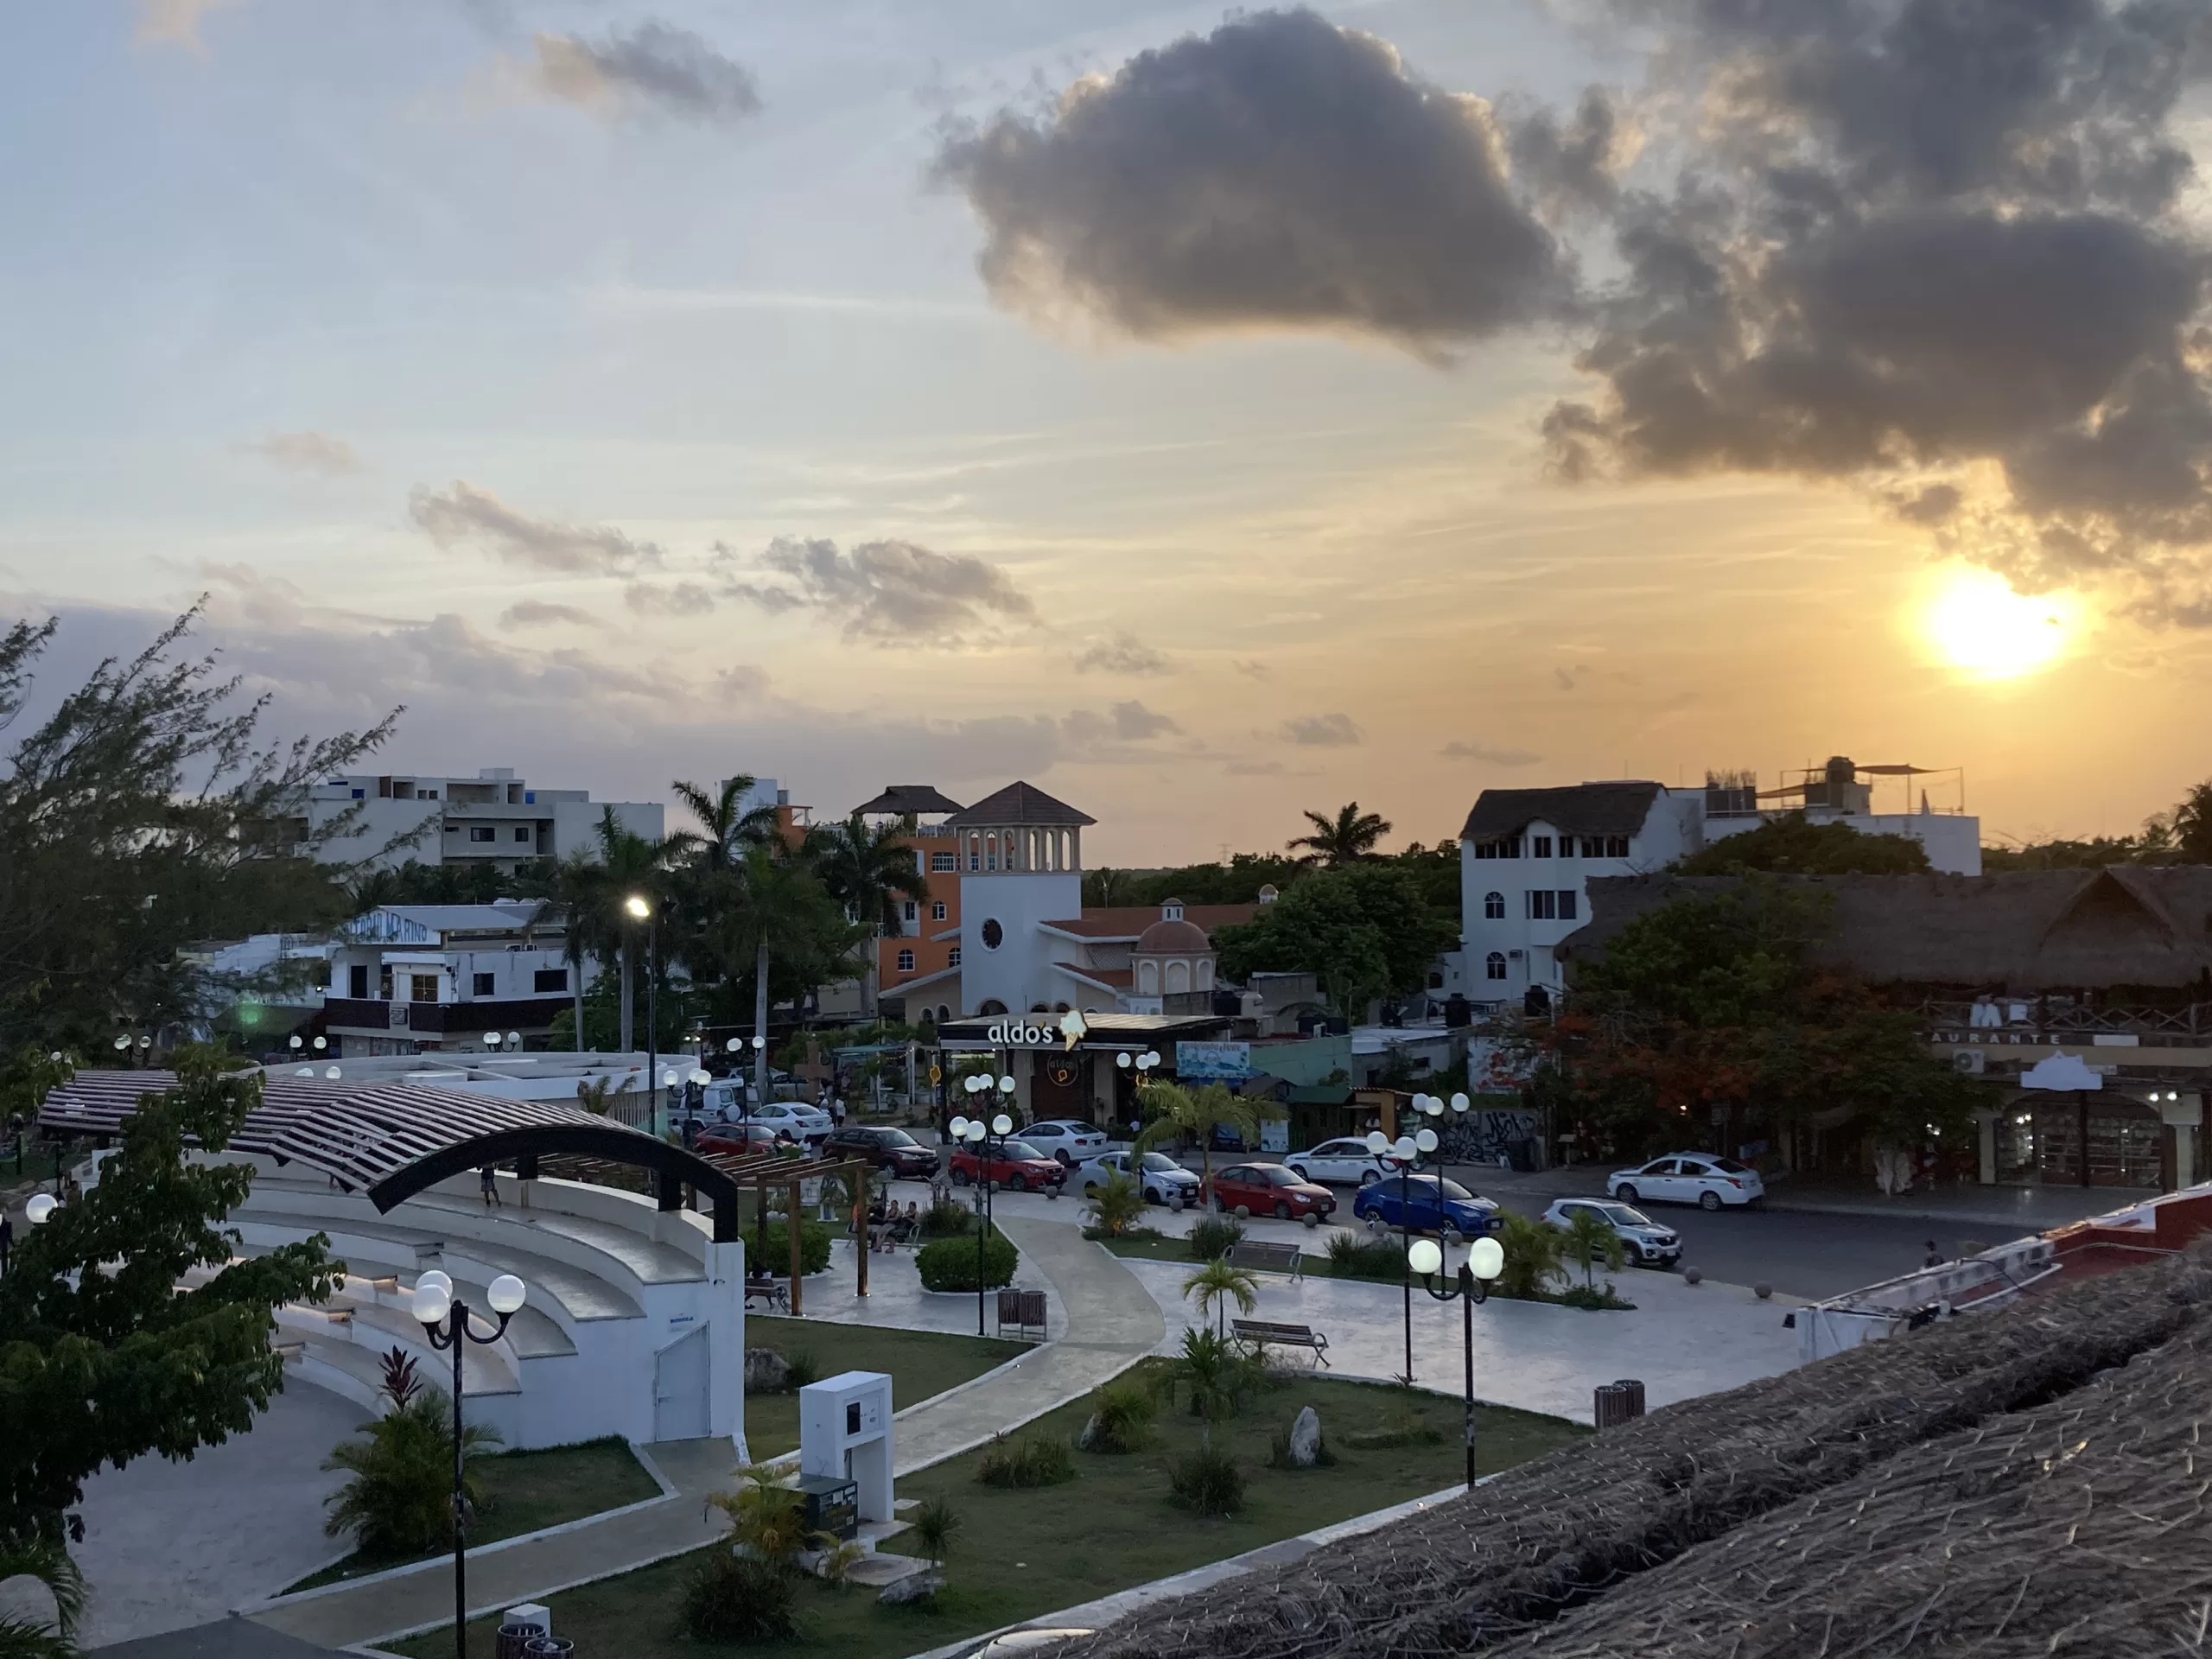 Sunset view of Puerto Morelos central park from La Sirena rooftop.